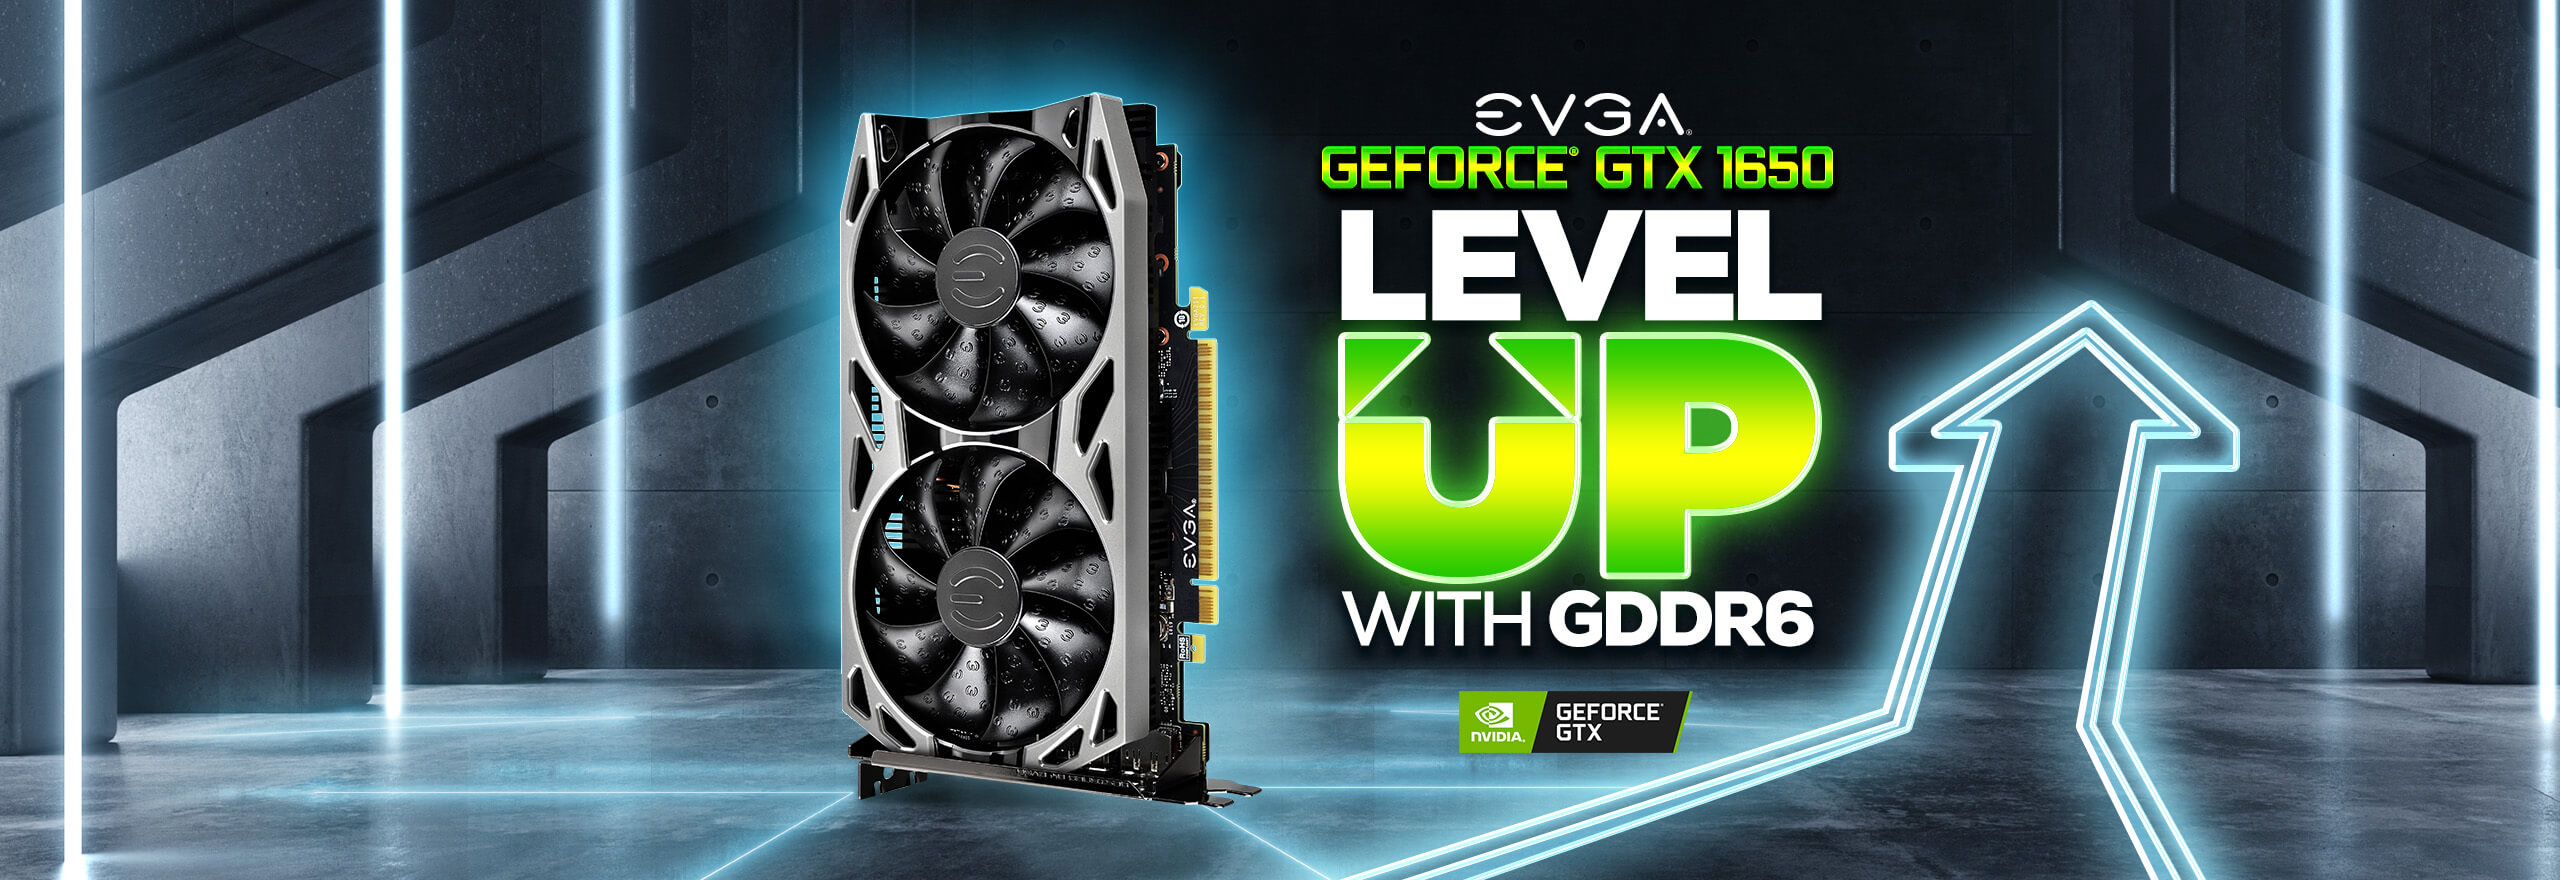 EVGA GTX 1650 Levels Up. Now with GDDR6